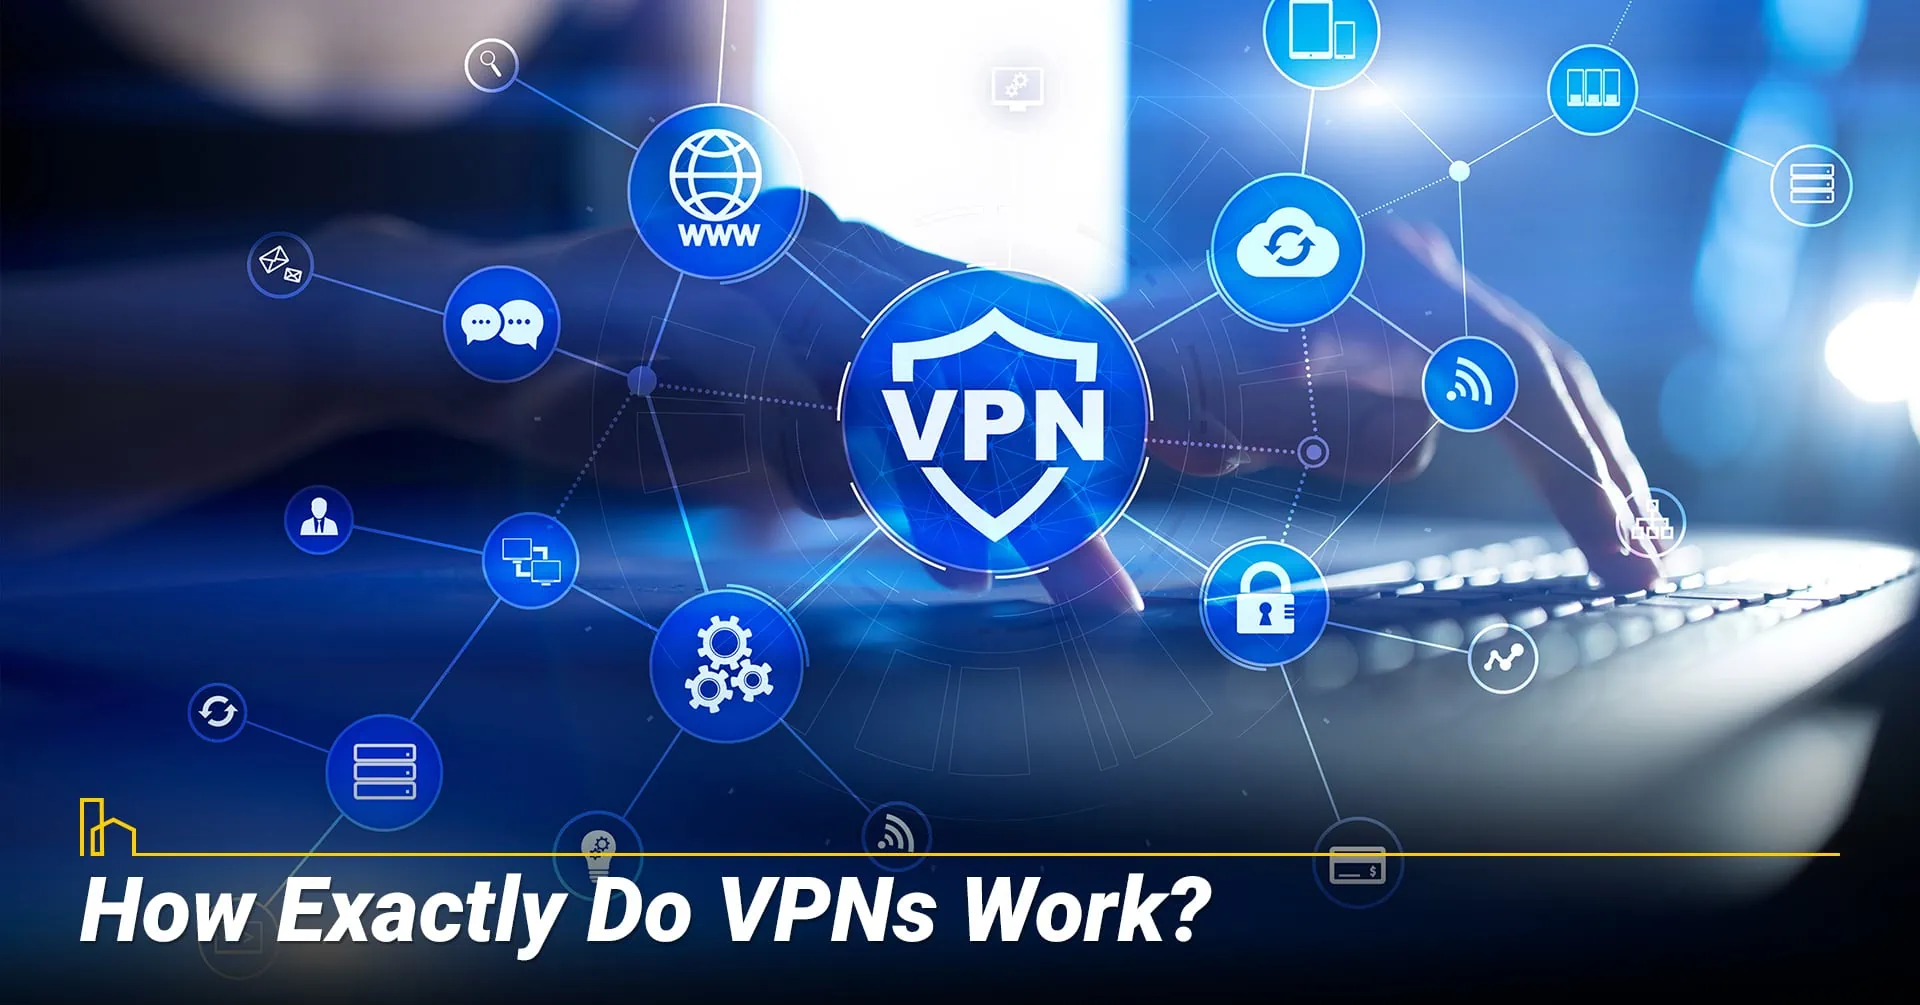 How Exactly Do VPNs Work?